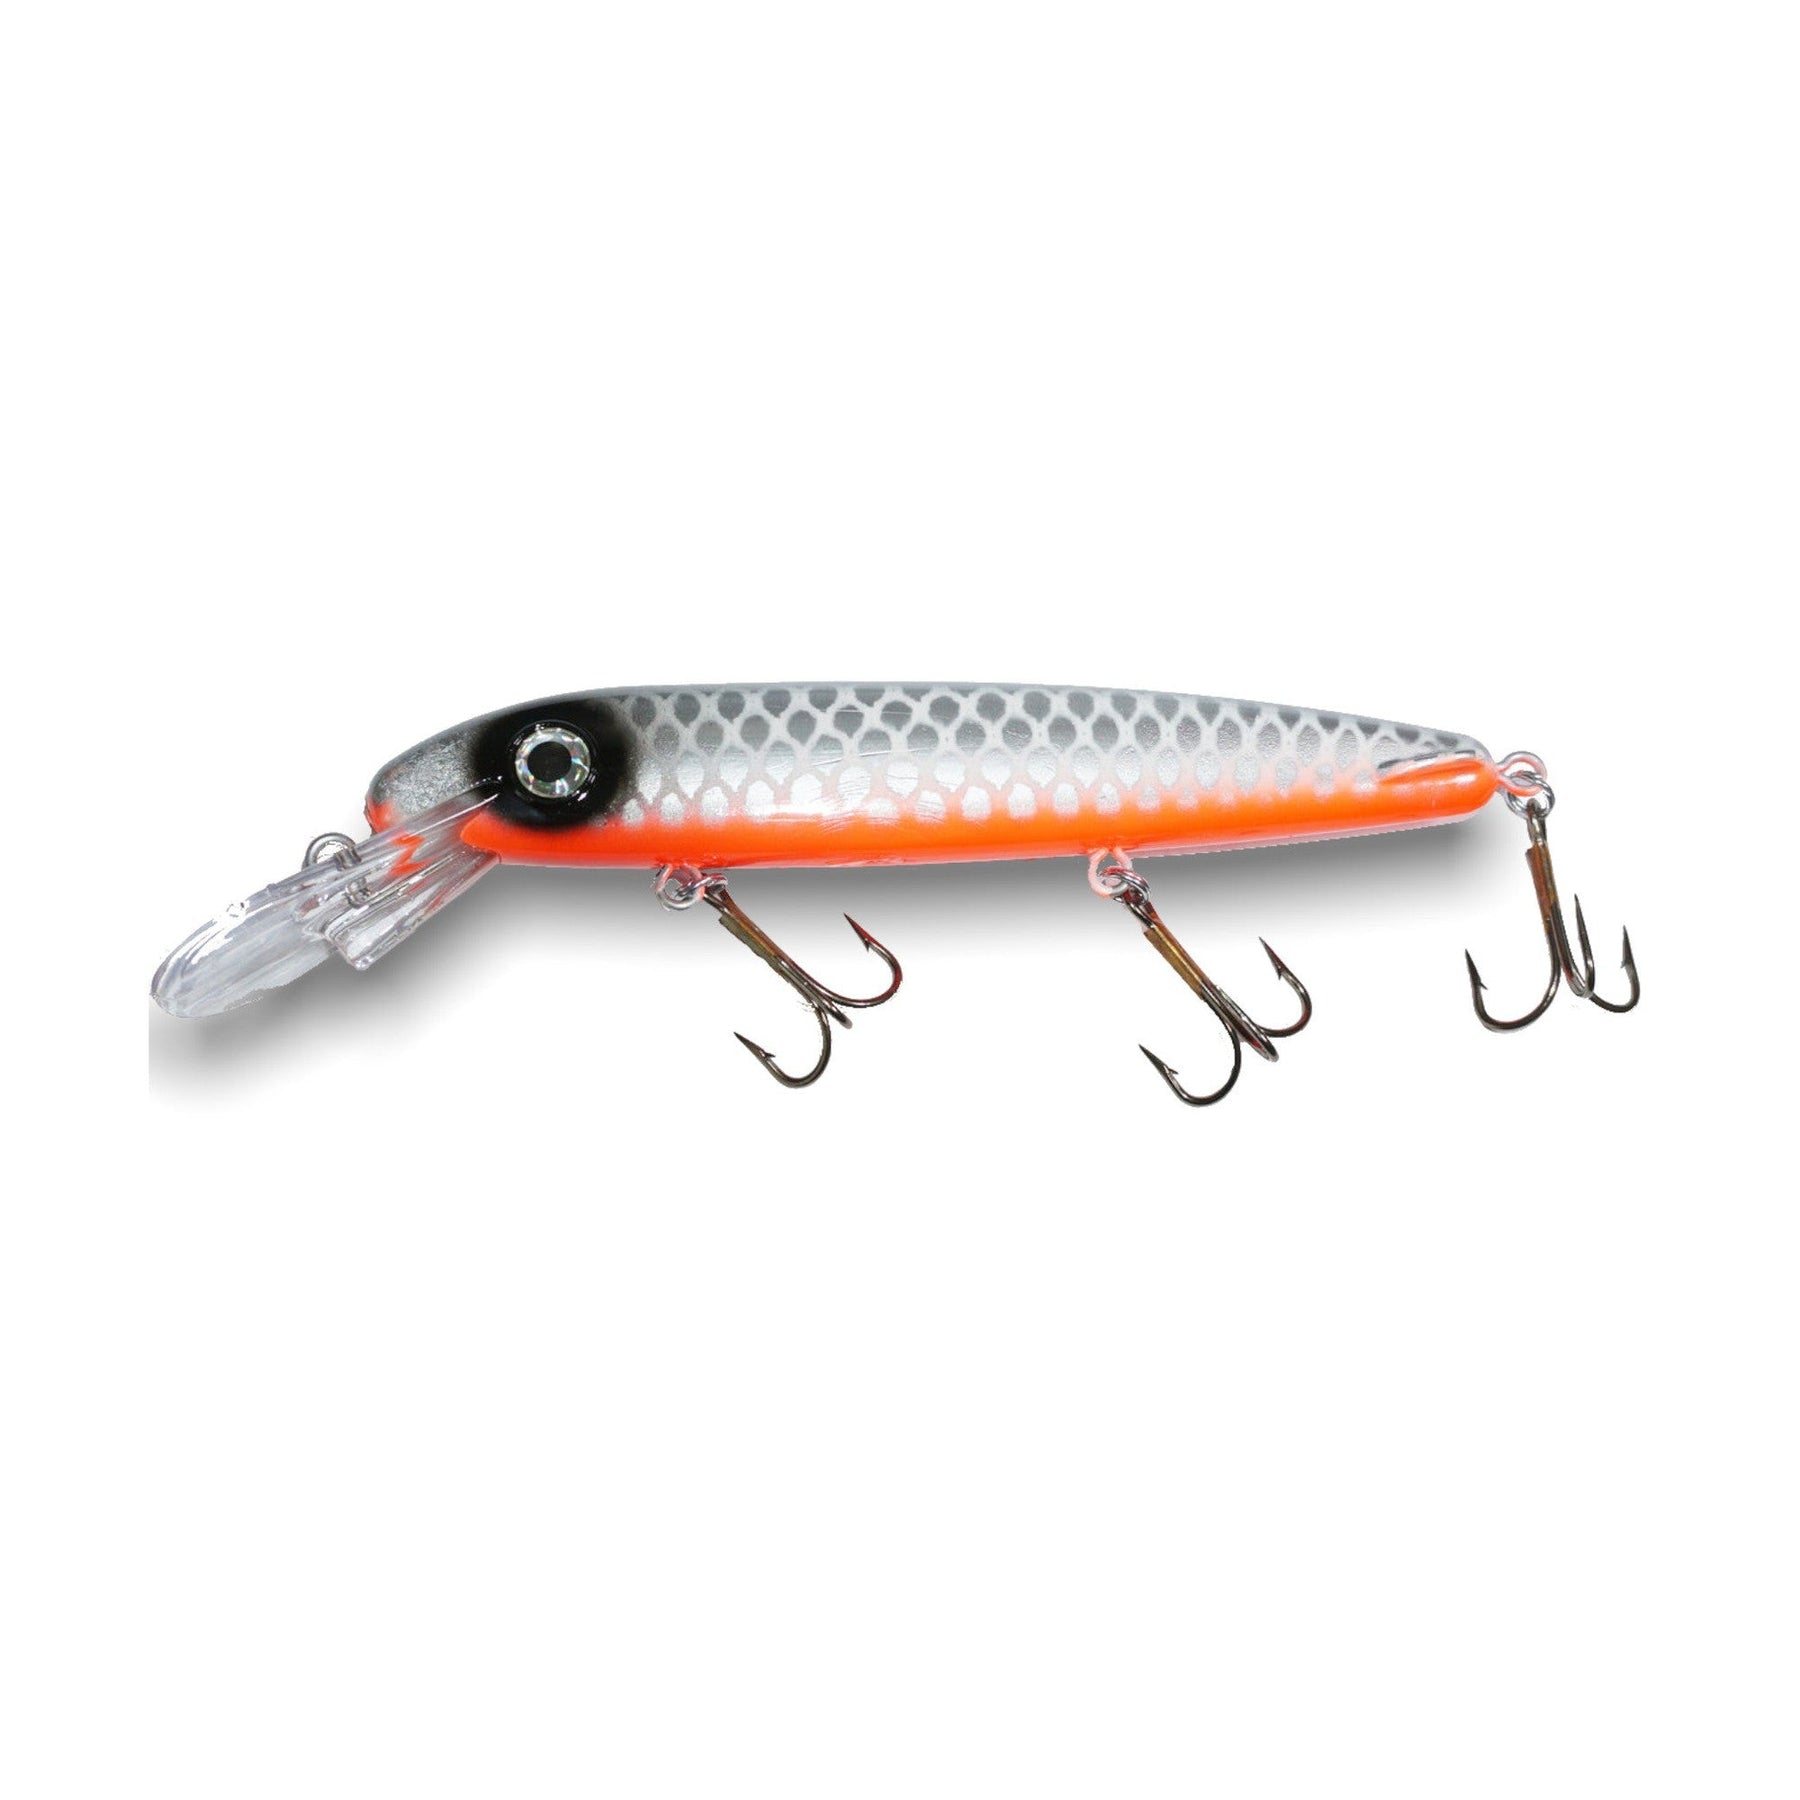 View of Crankbaits ERC Triple D Crankbait Hot White Fish available at EZOKO Pike and Musky Shop